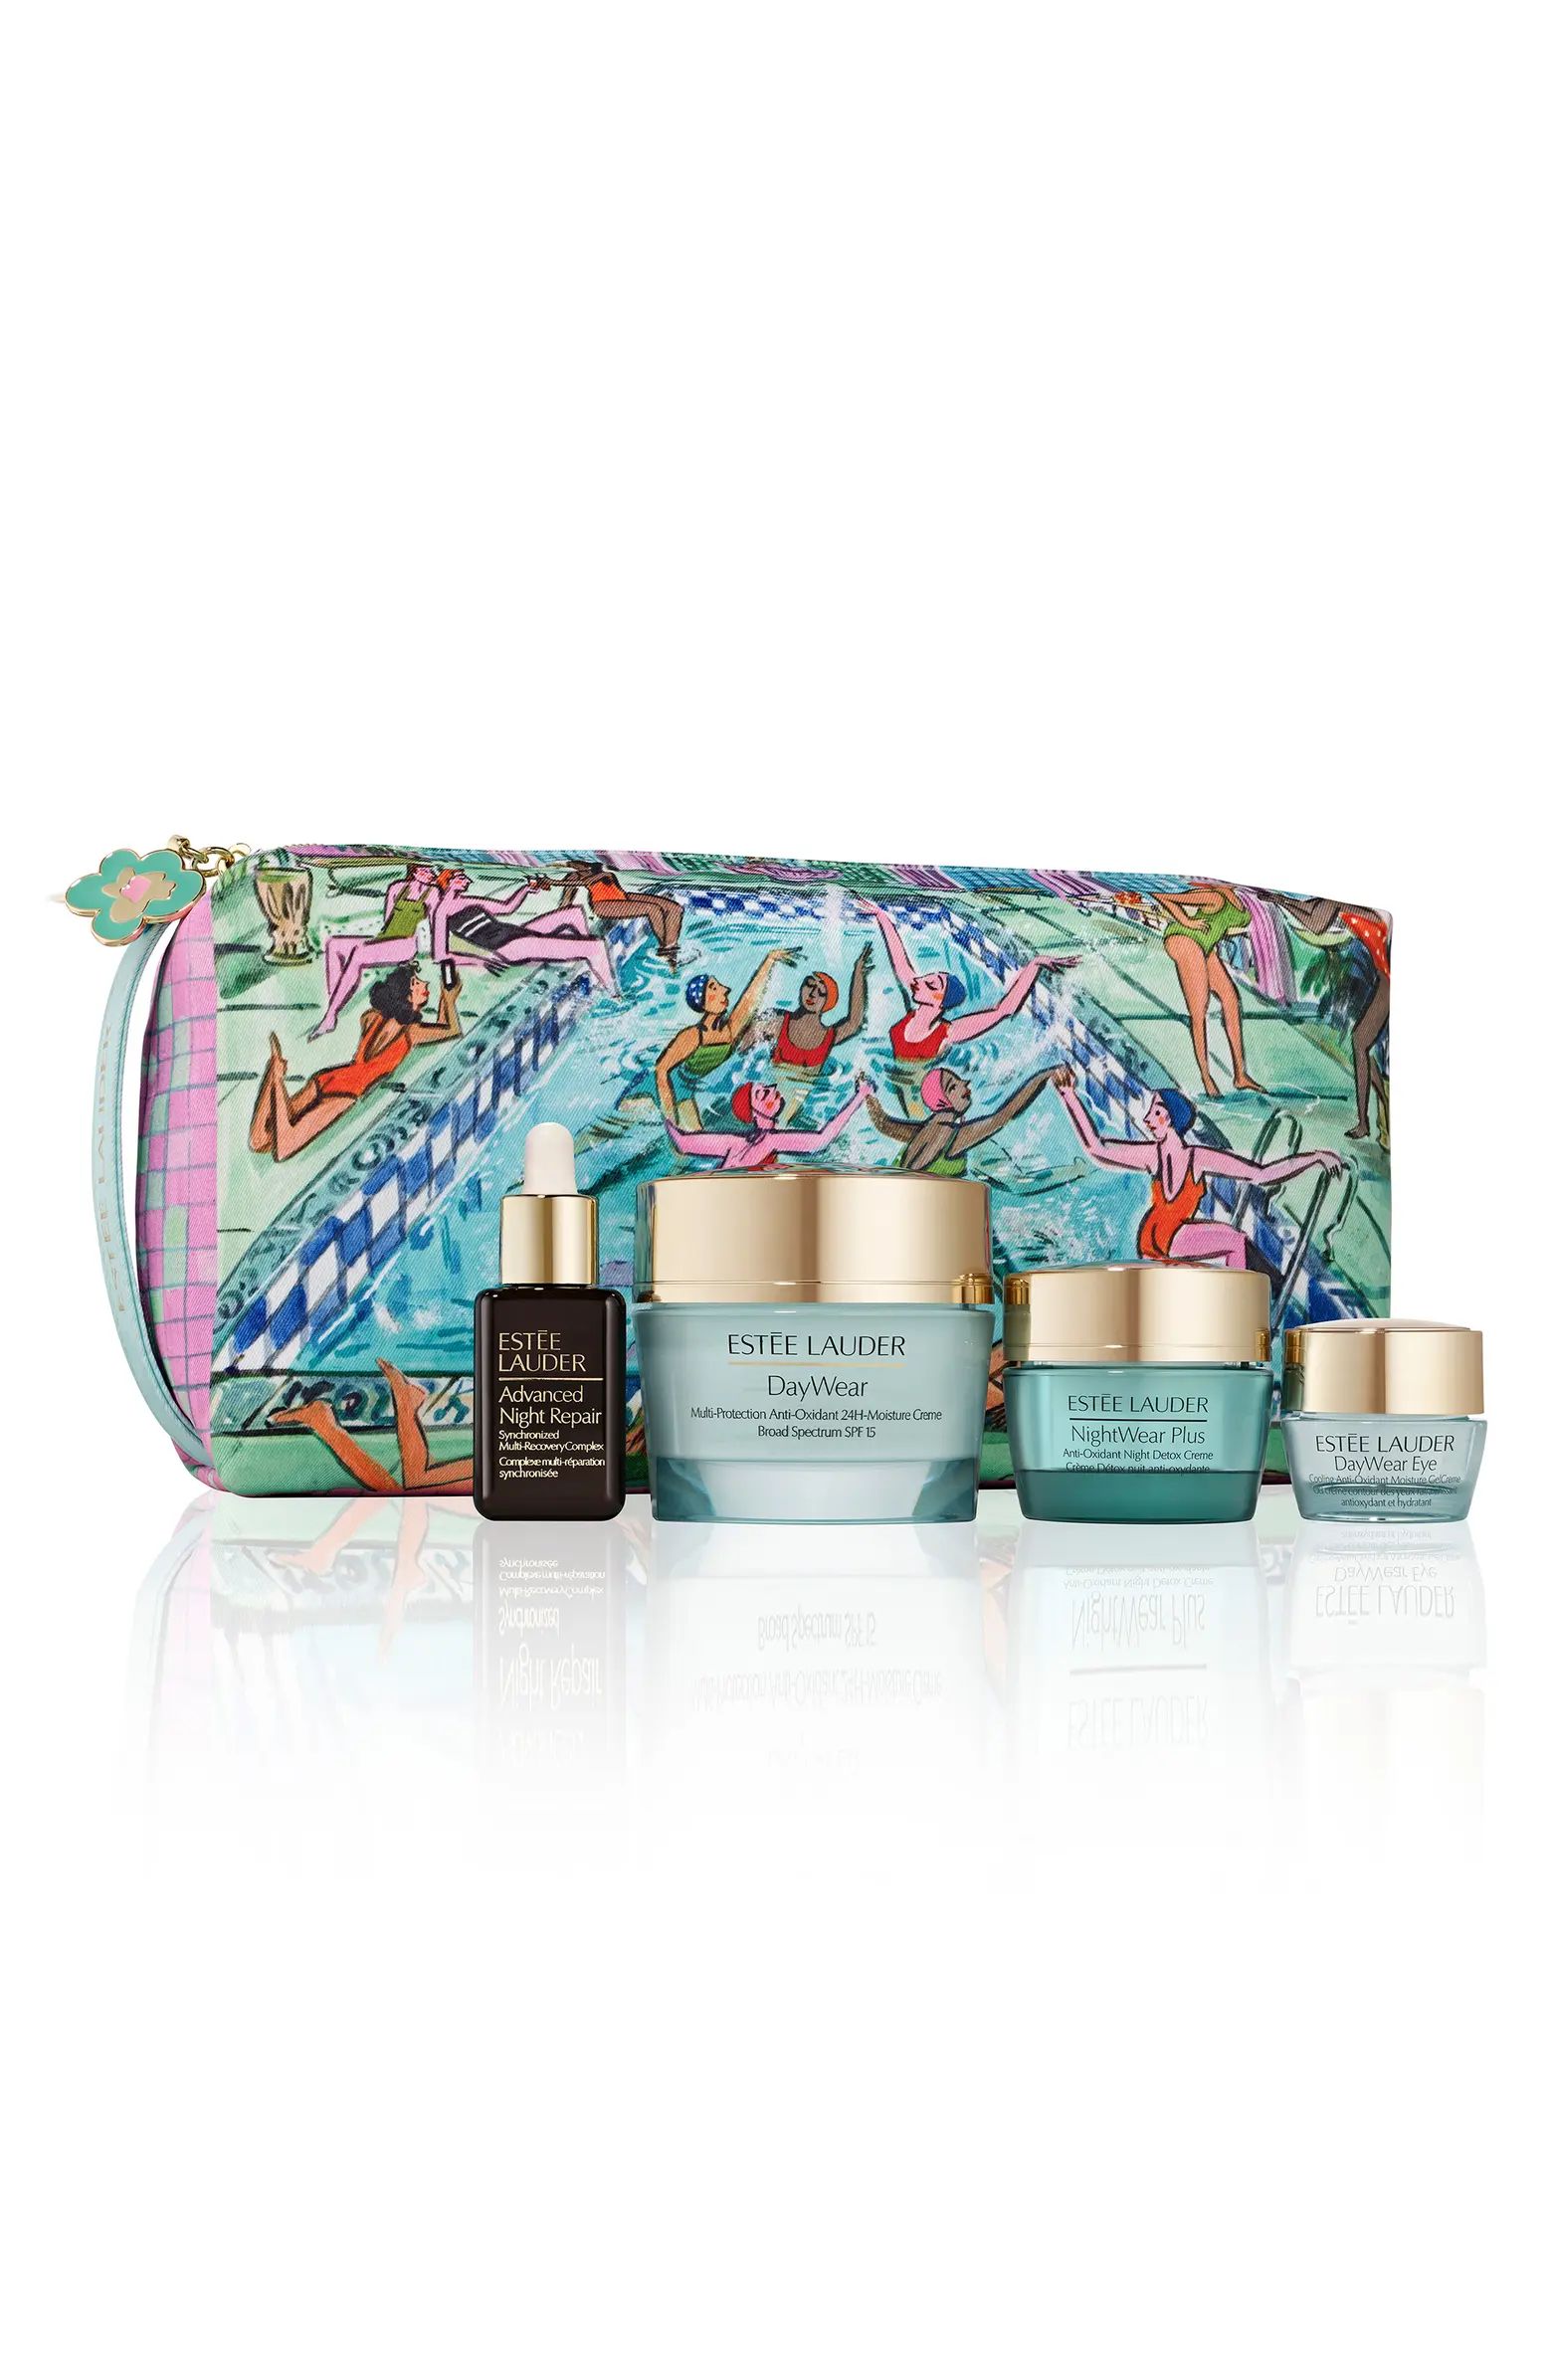 DayWear Skin Care Routine Set (Limited Edition) $154 Value | Nordstrom